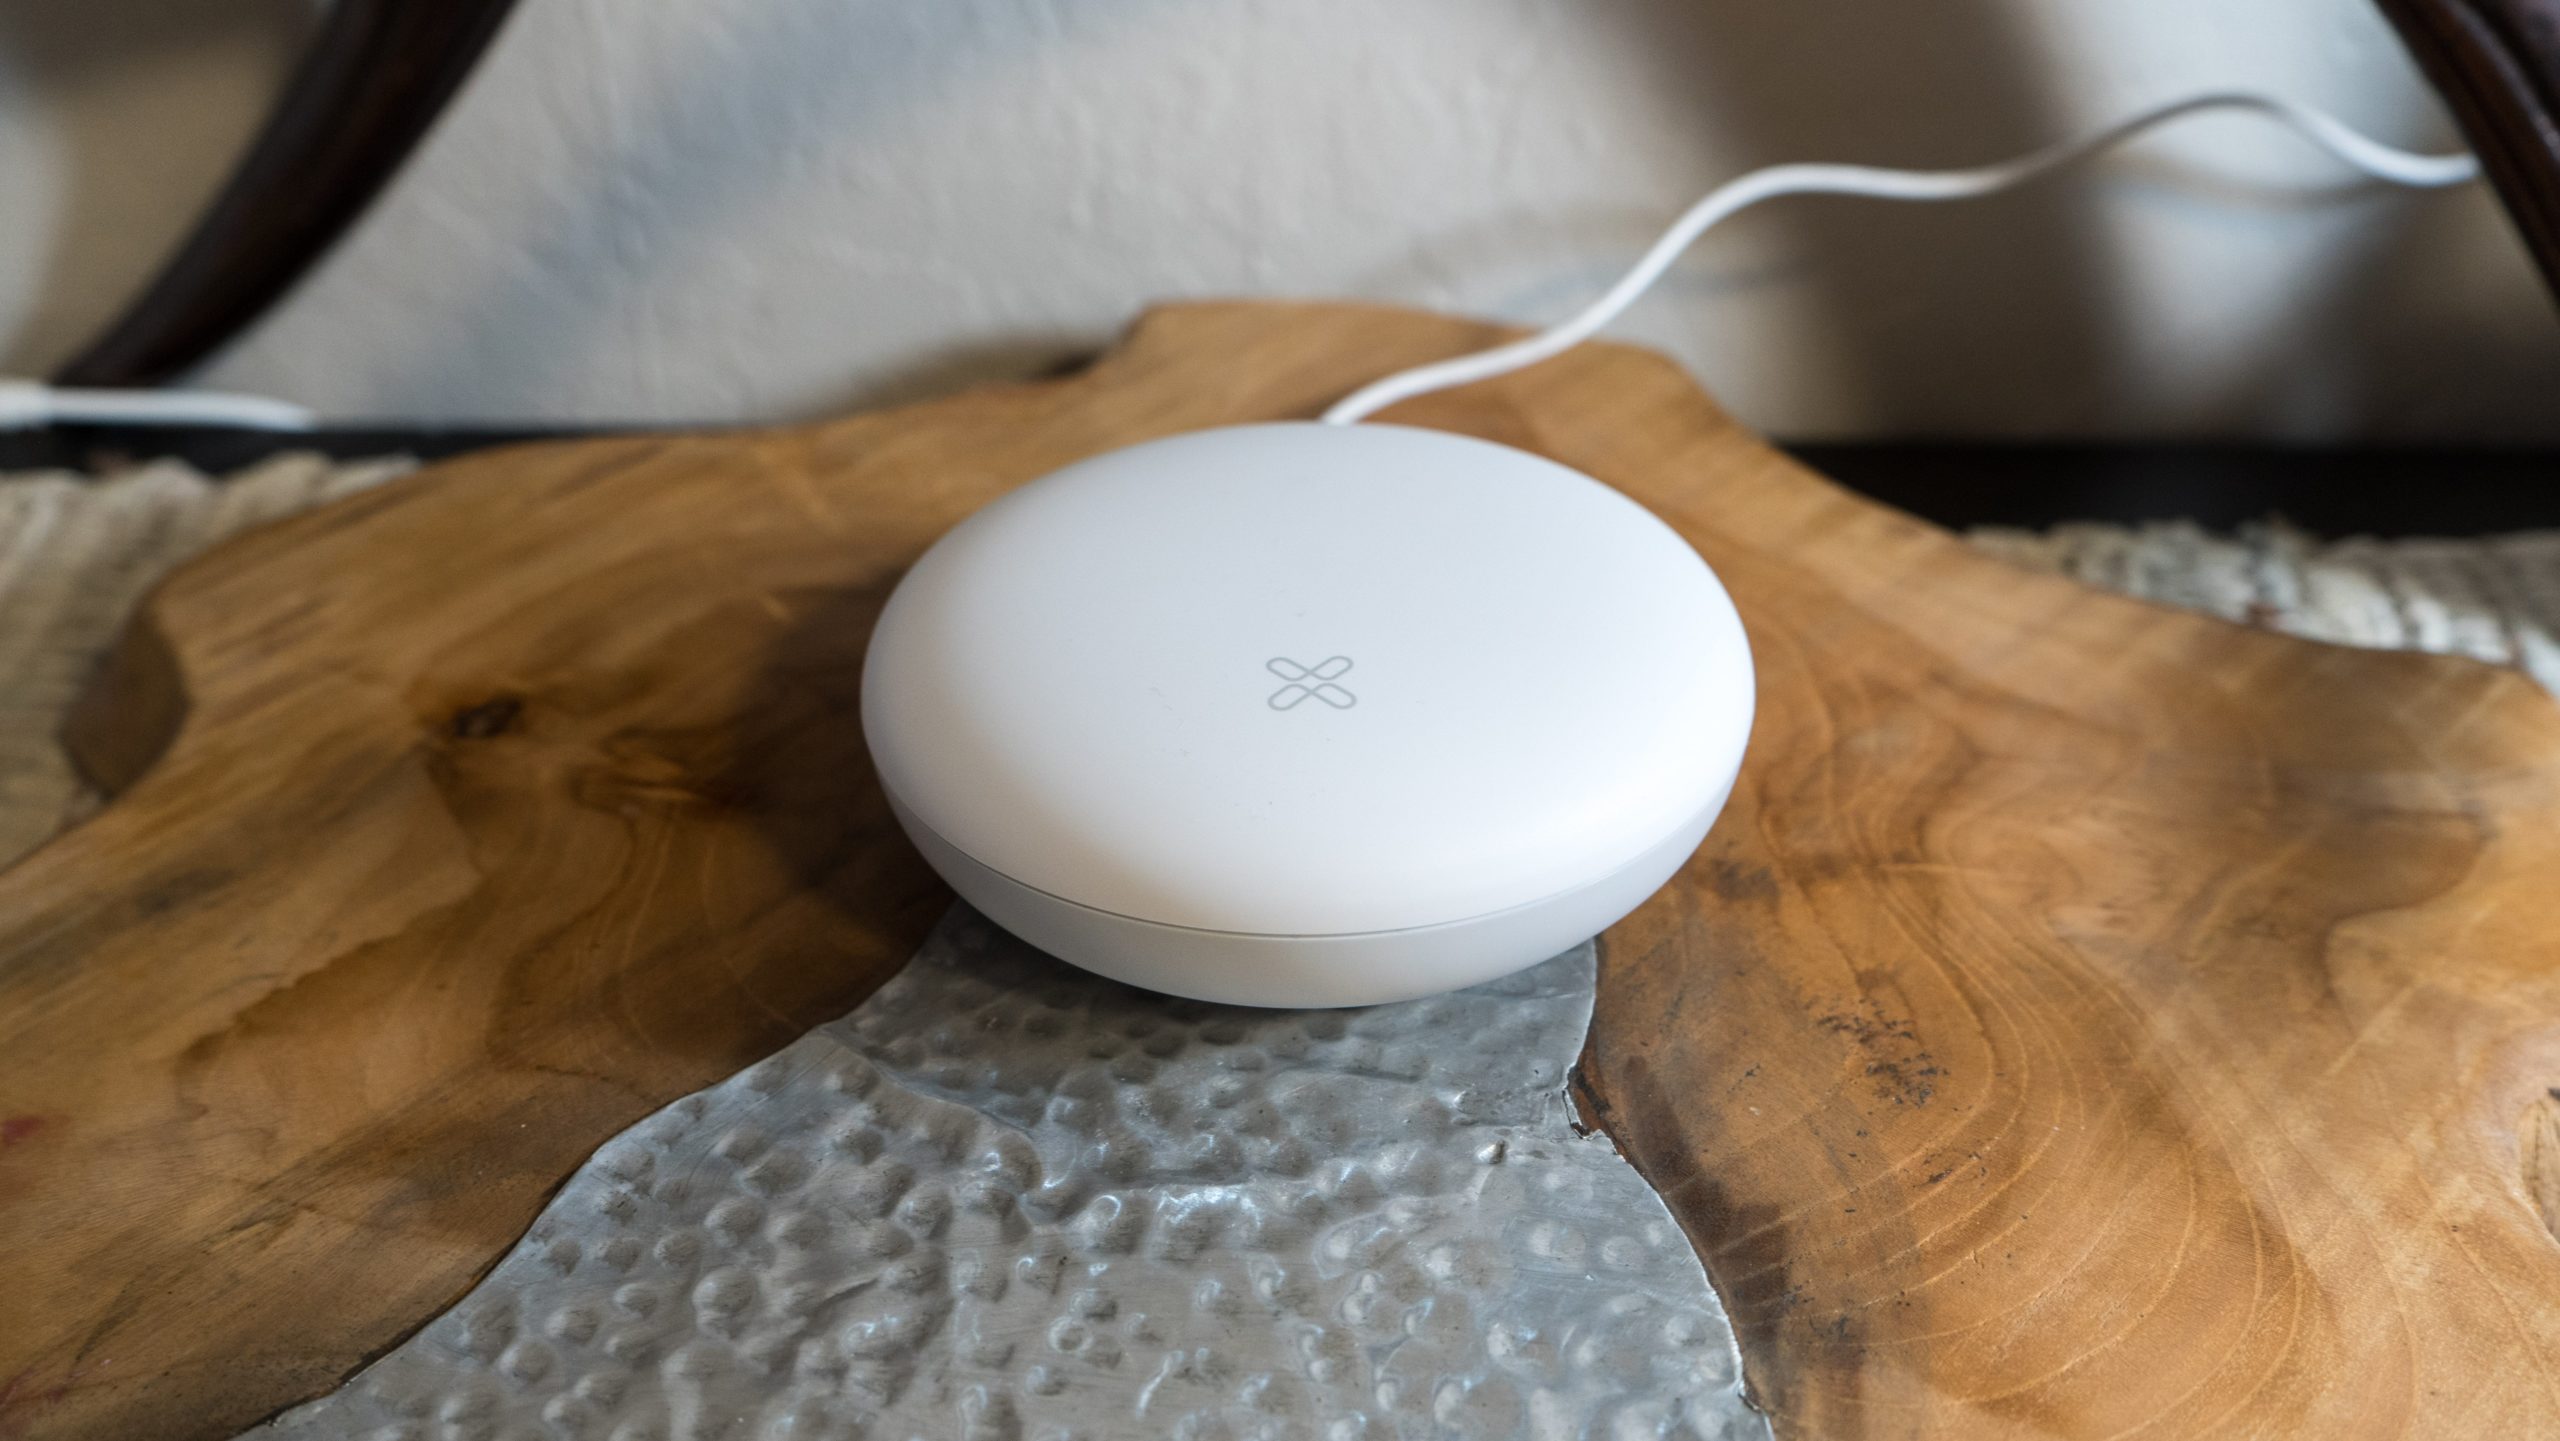 The Hex Command, or the base station, can go anywhere in the common room of your home.  (Photo: Florence Ion / Gizmodo)